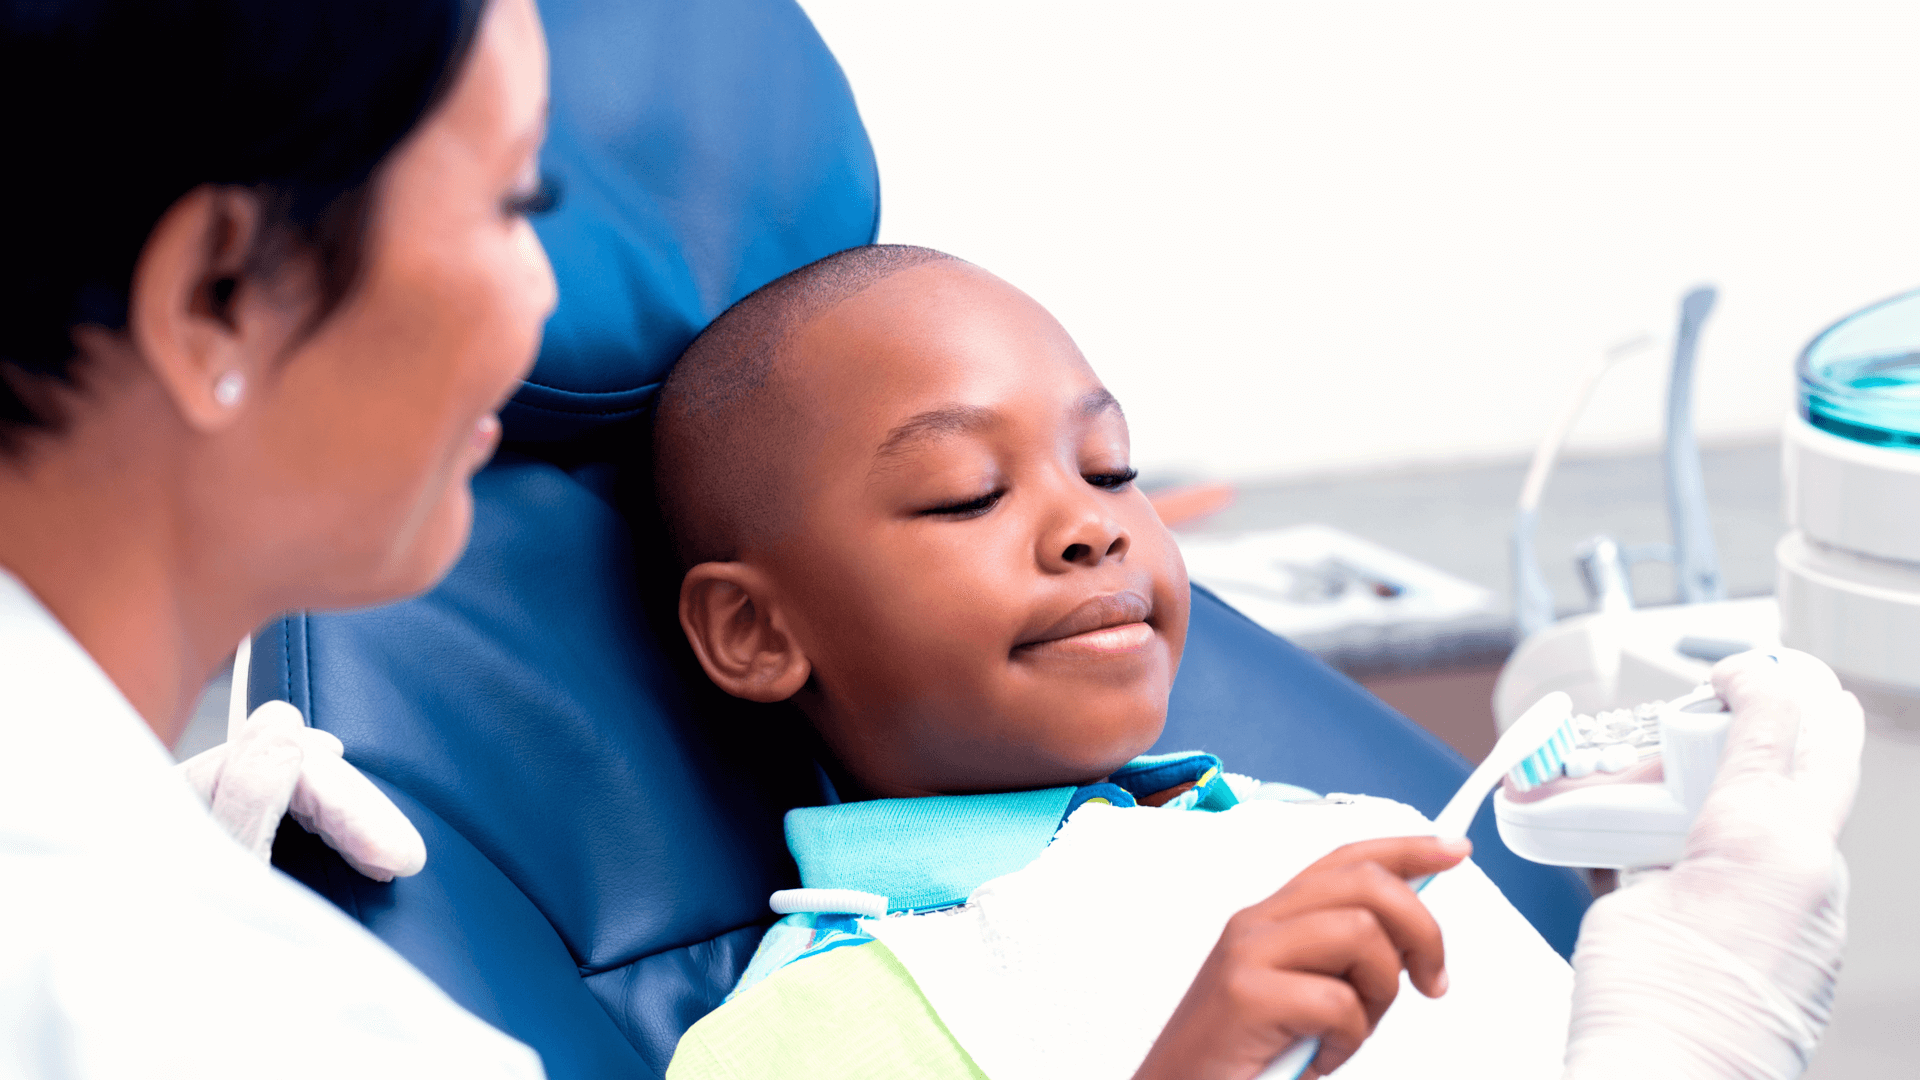 Pediatric dentists have more years of training before they start their practice. Their training helps them treat children, provide a comfortable environment, and interact with children that have special needs.